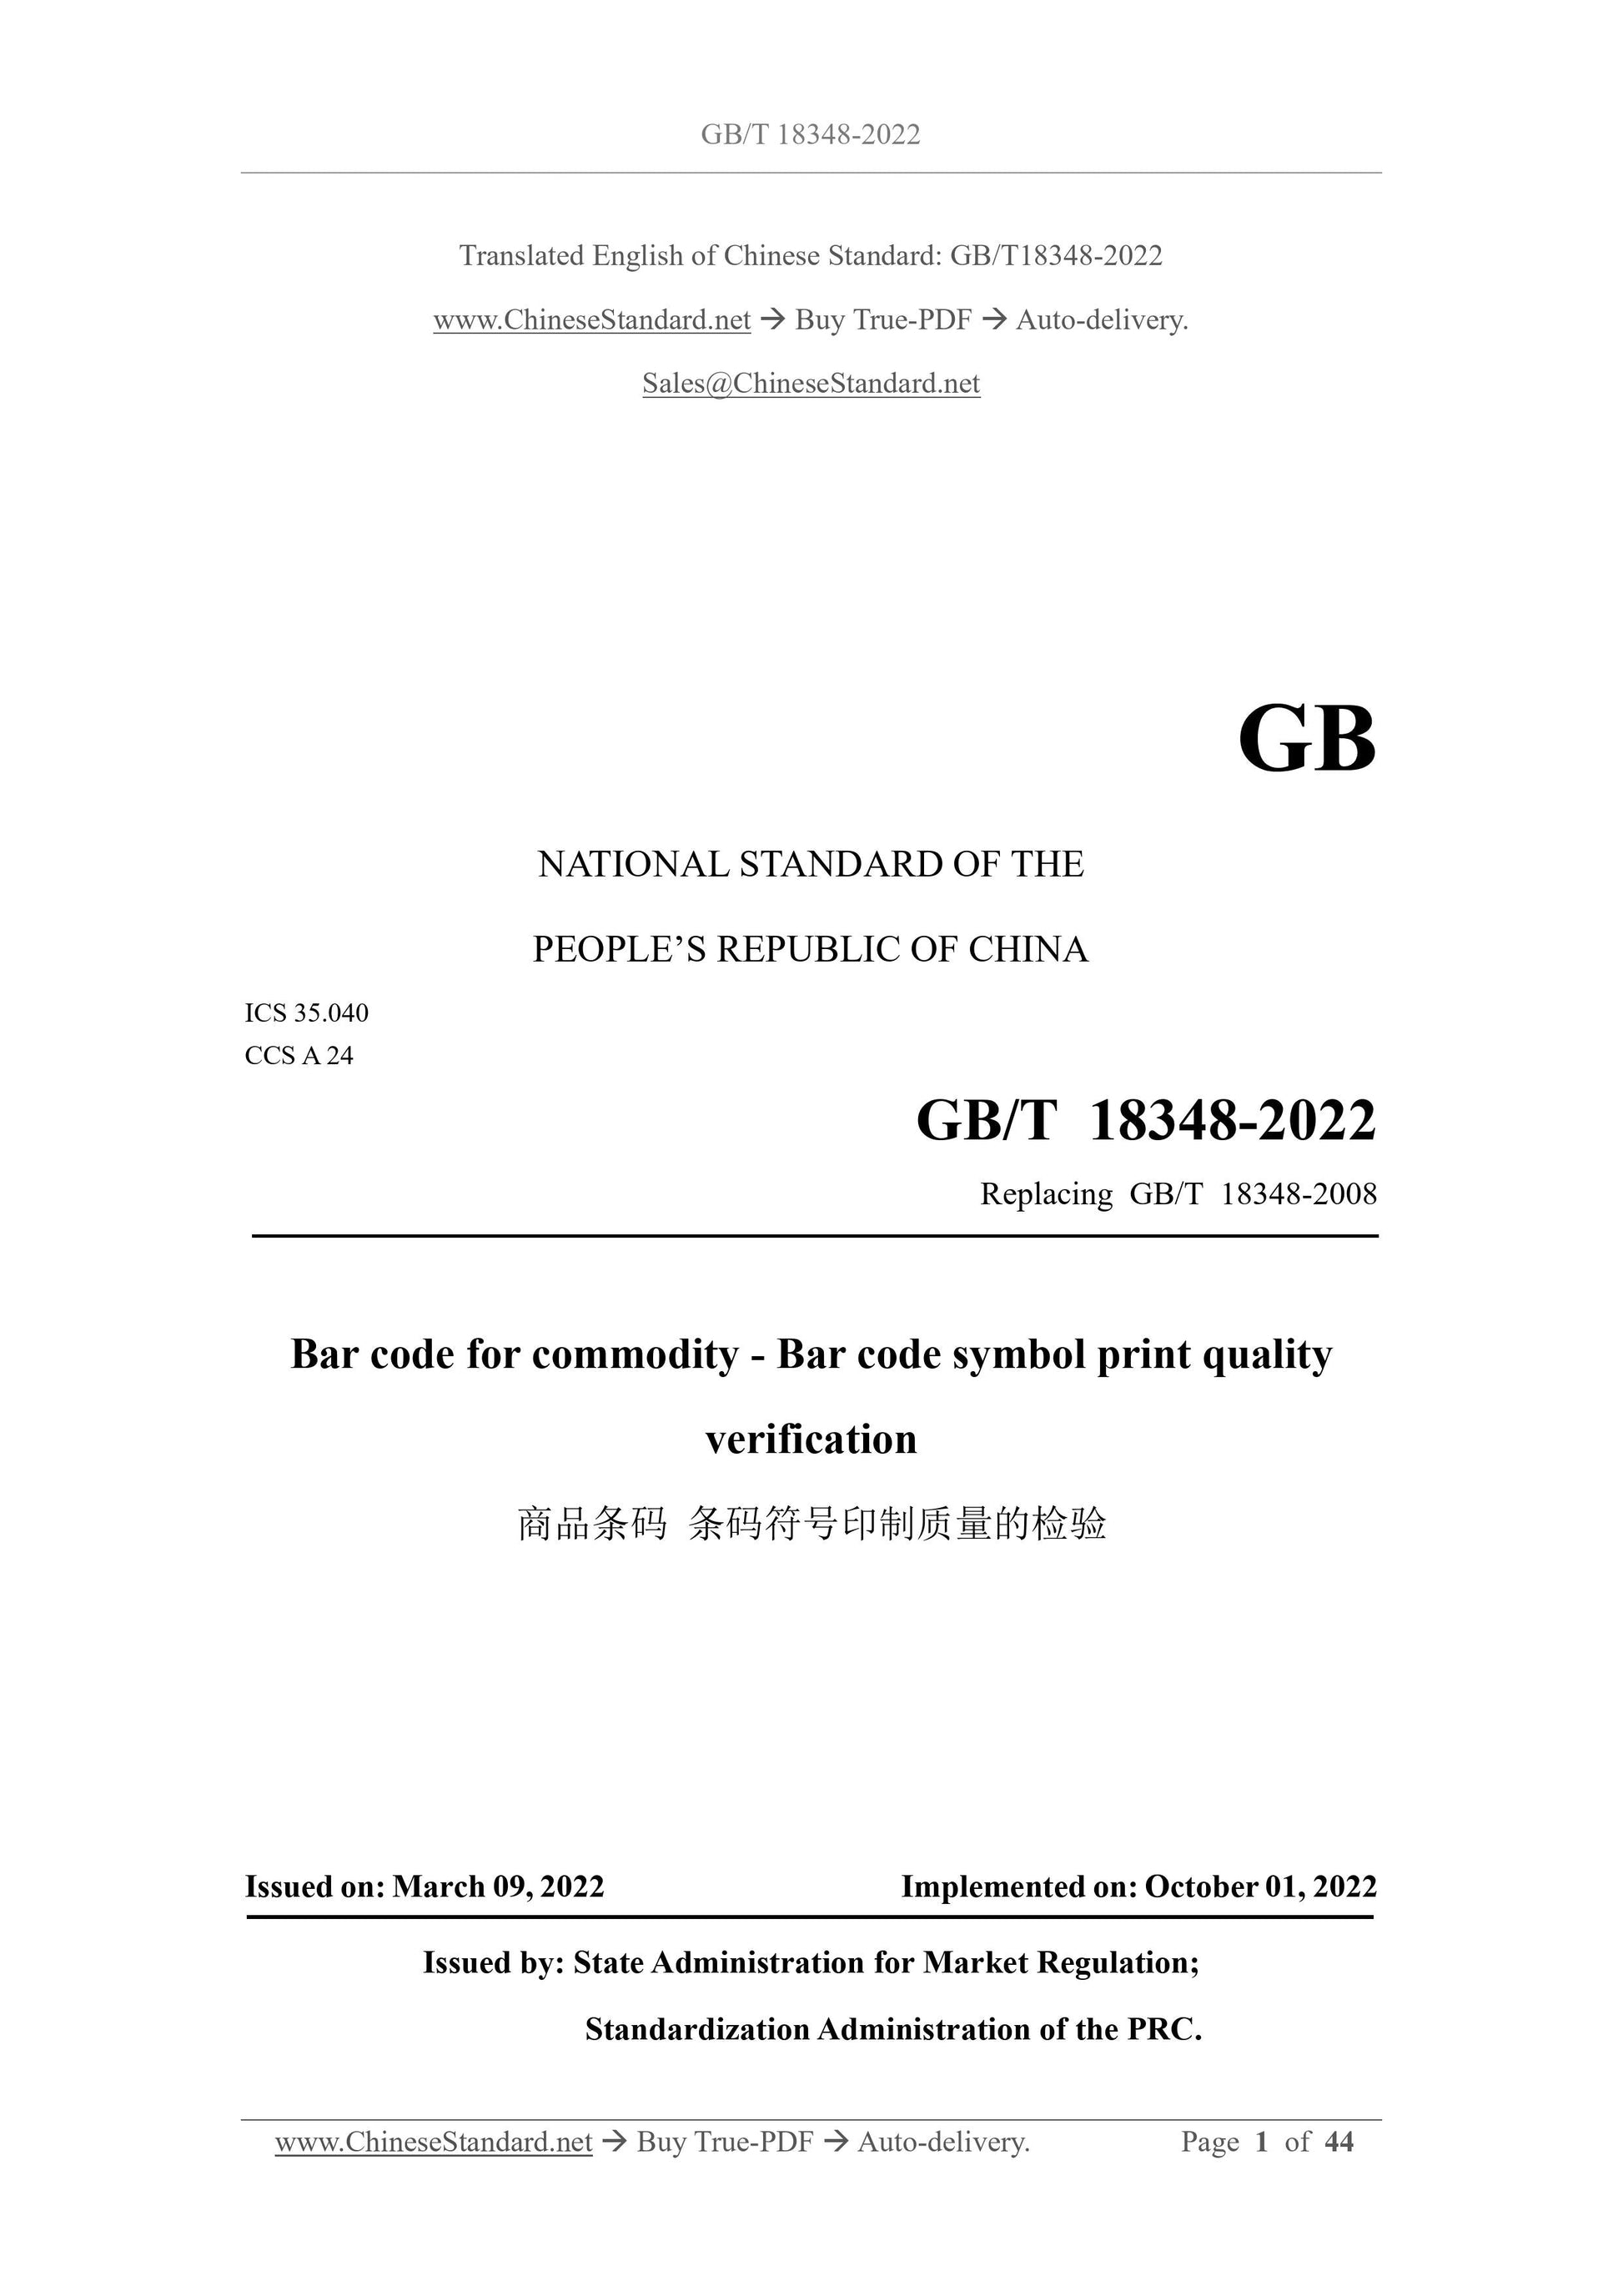 GB/T 18348-2022 Page 1